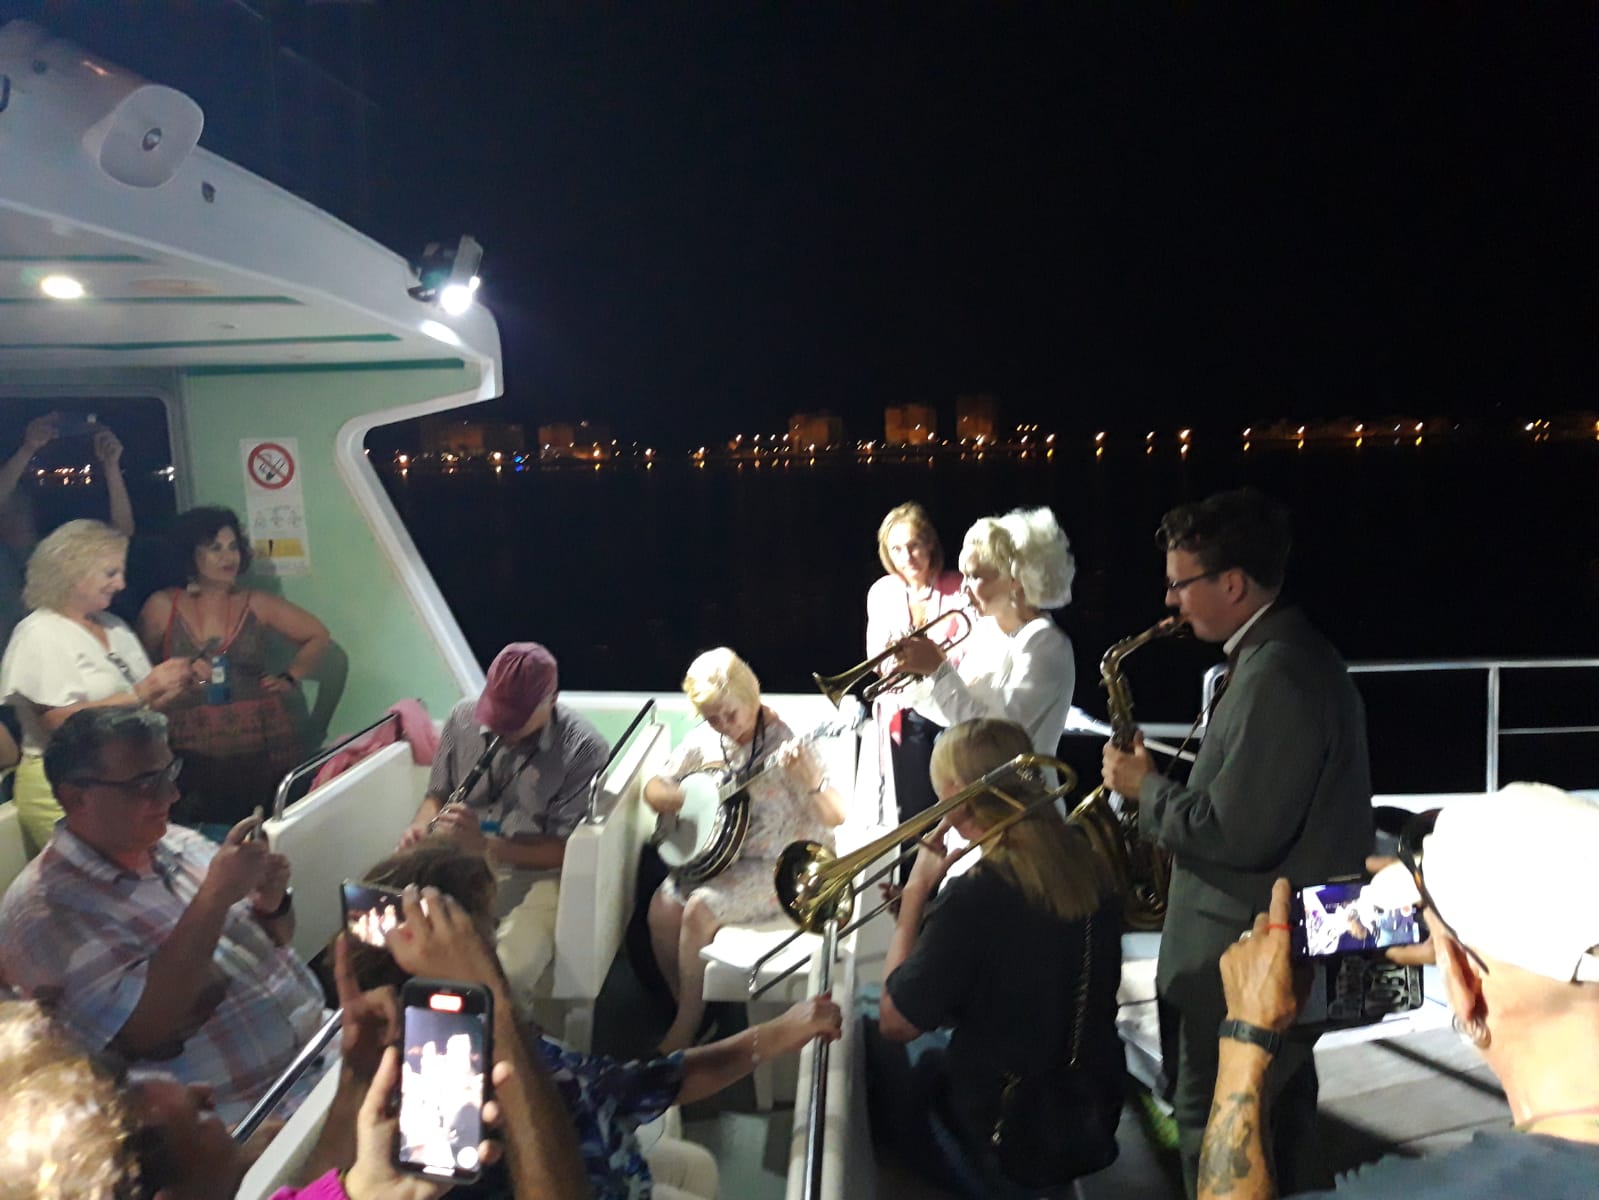 Carling family in concert on the boat